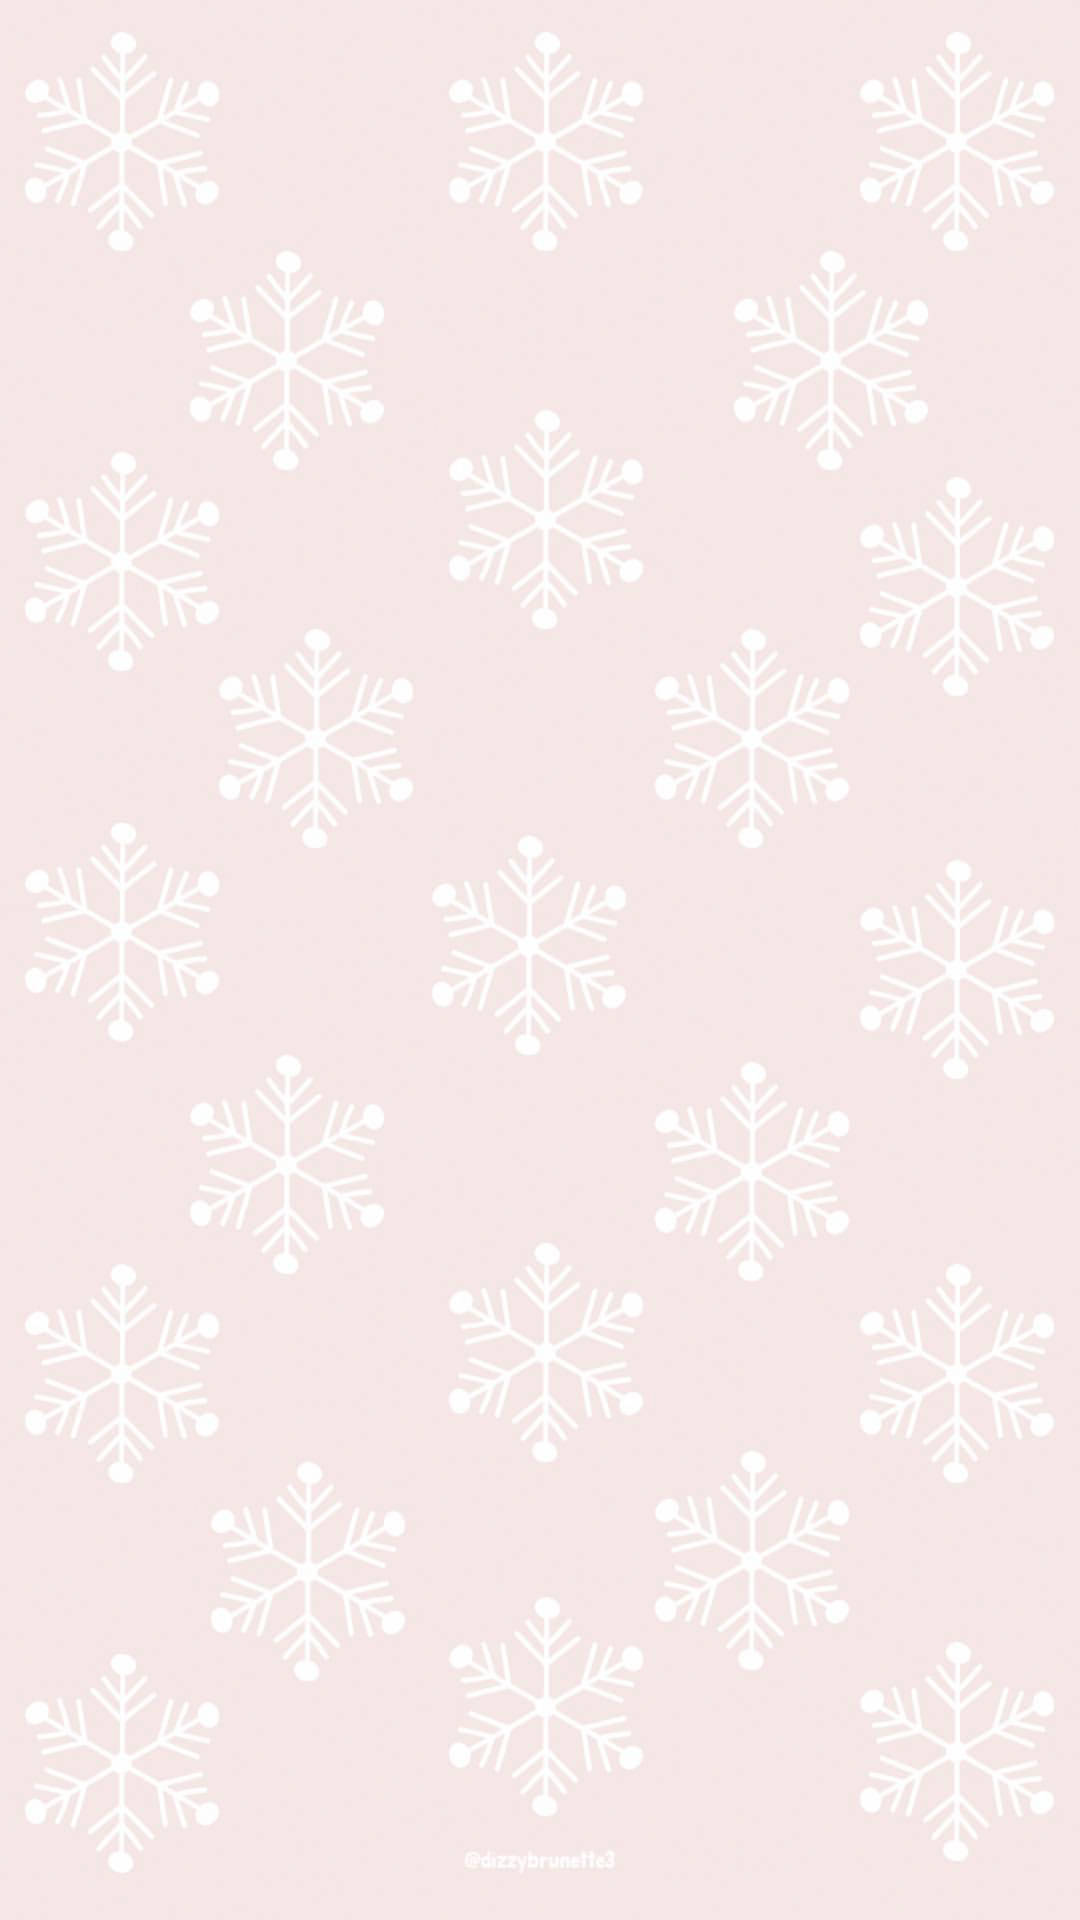 Enjoy winter with this adorable Cute Winter iPhone Wallpaper